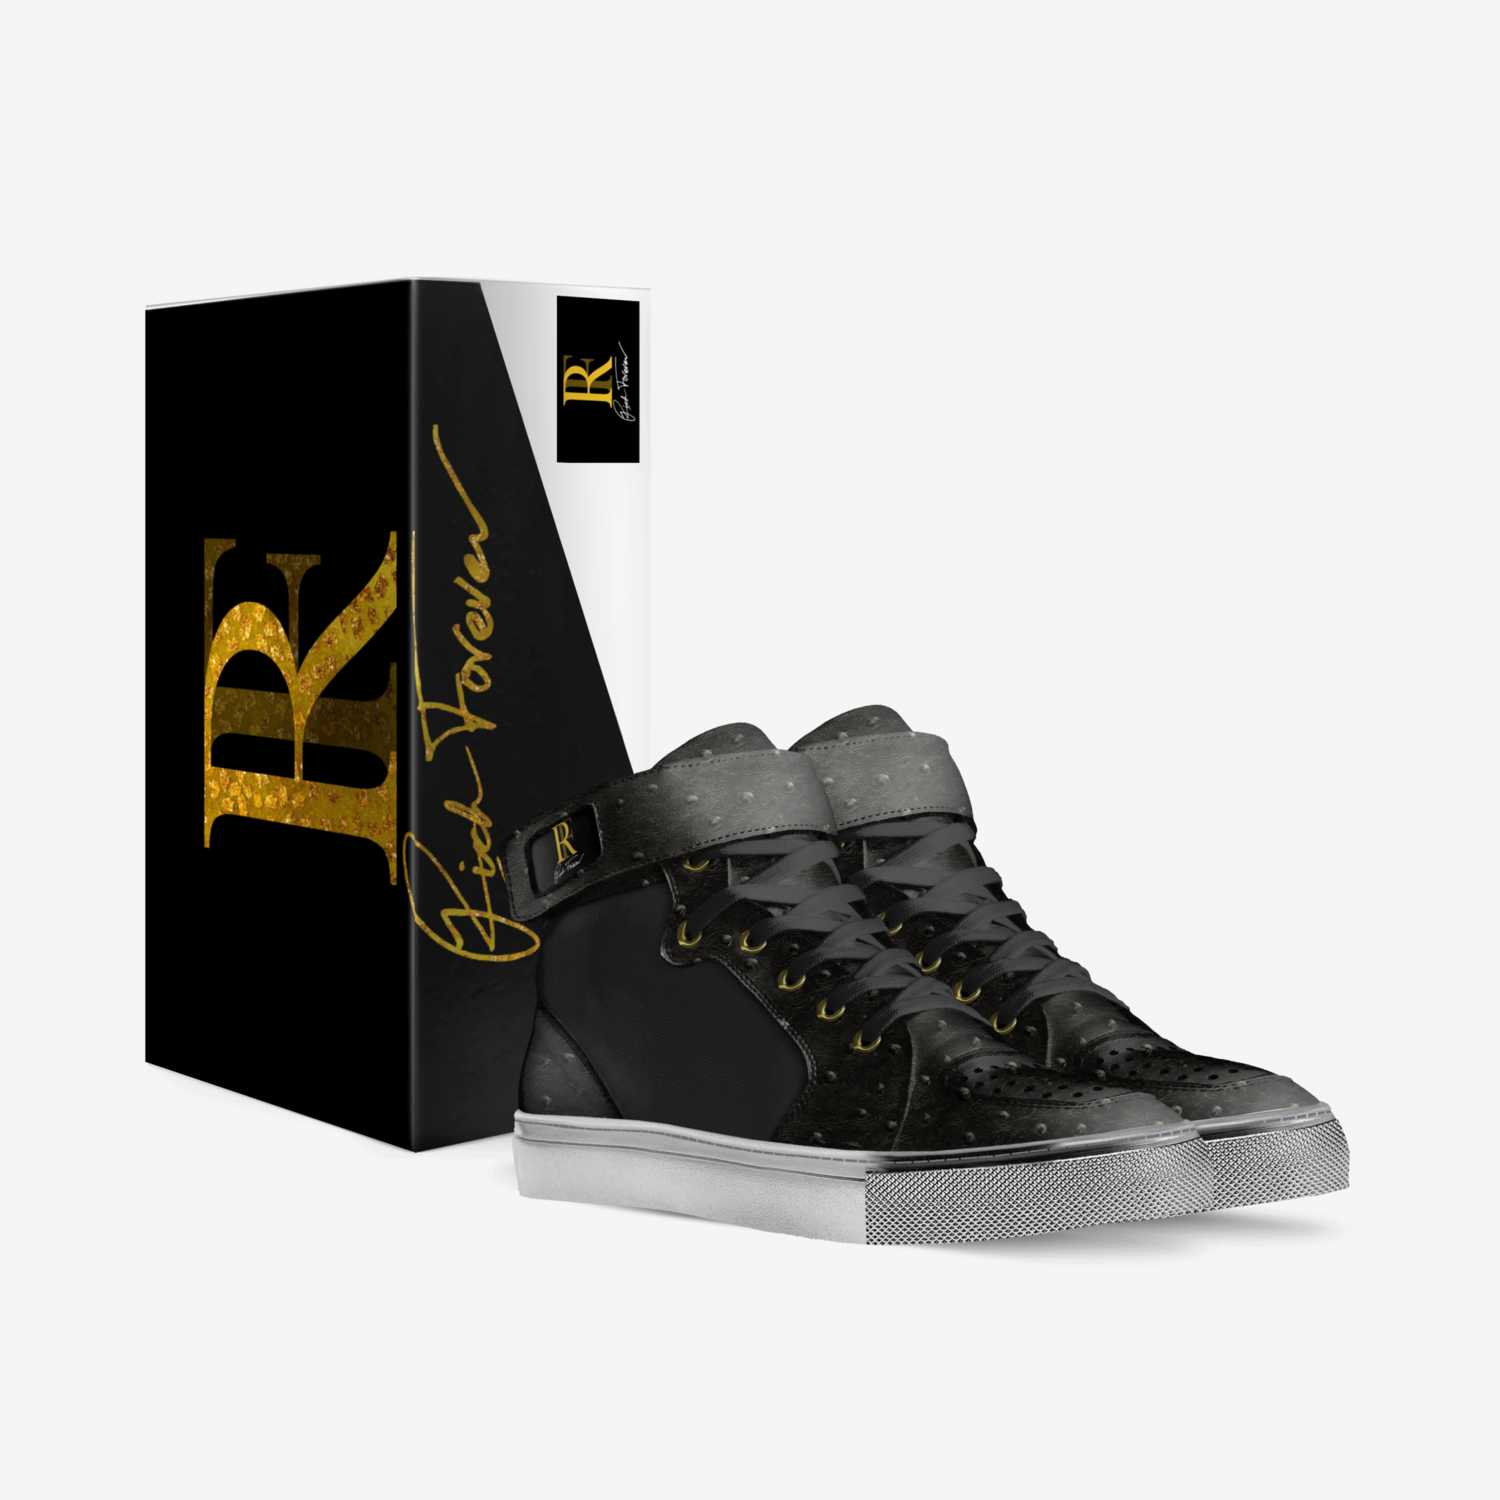 Citas custom made in Italy shoes by Darnell Richardson | Box view